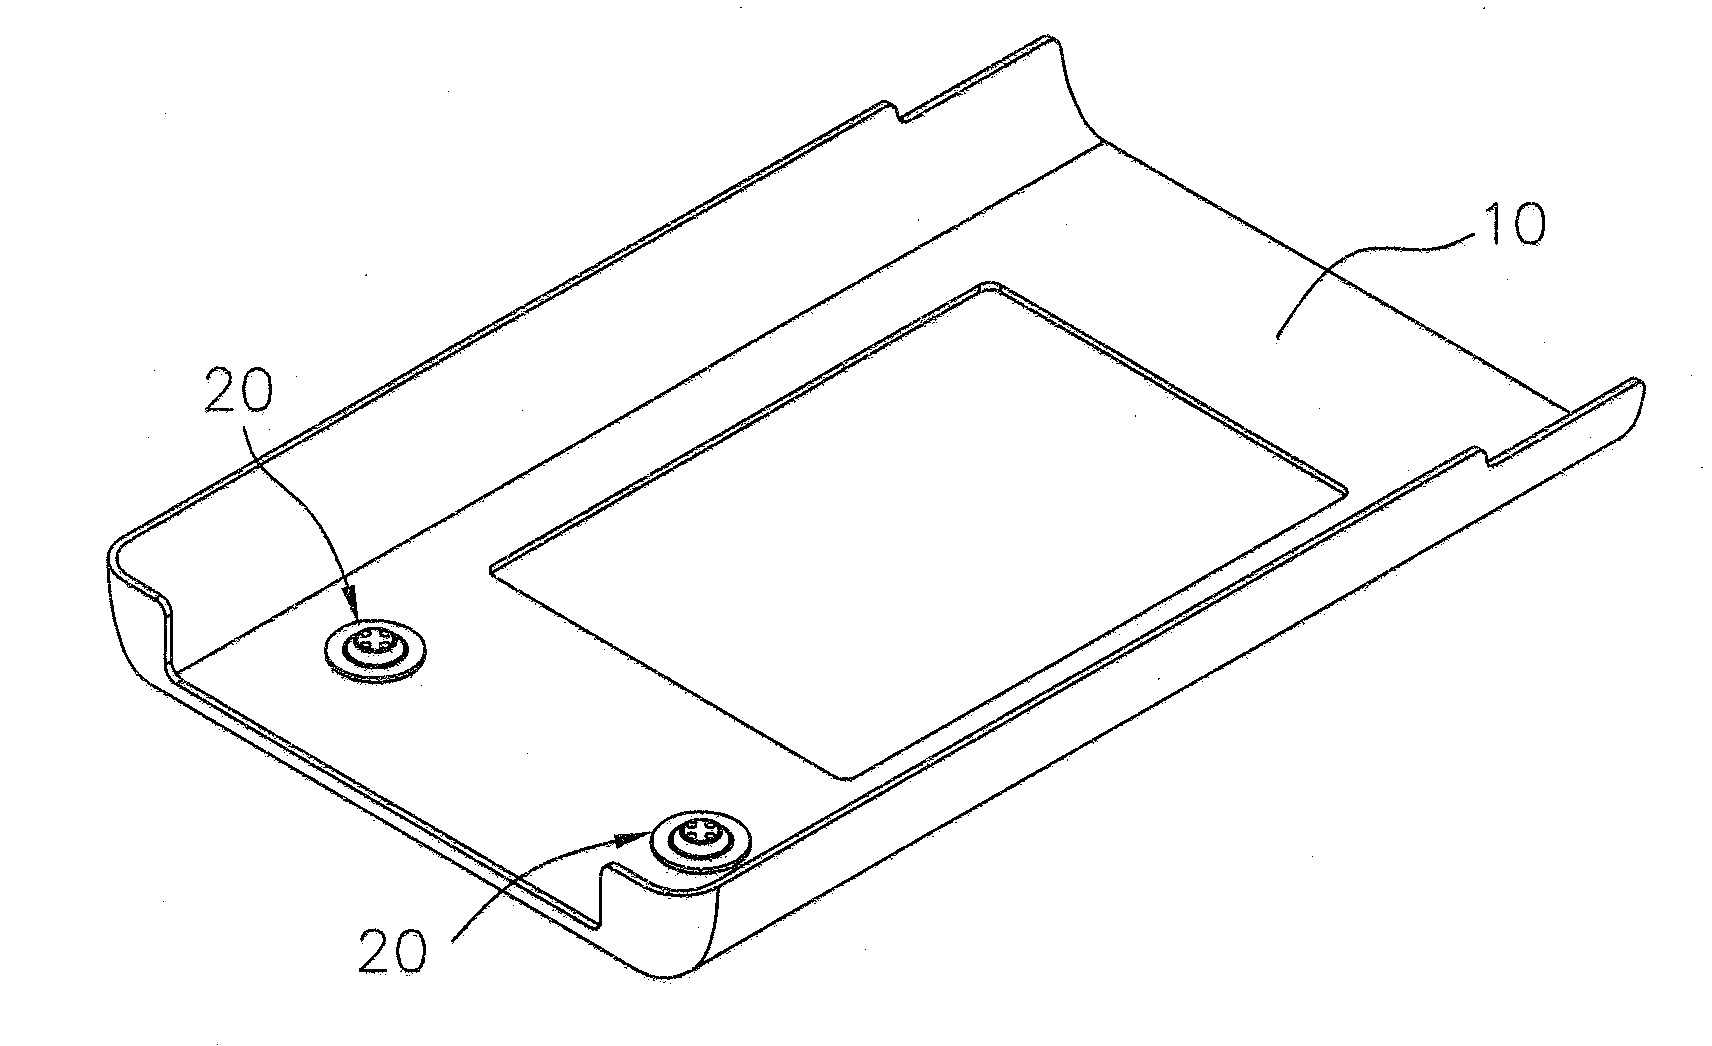 Method of selective plastic insert molding on metal component